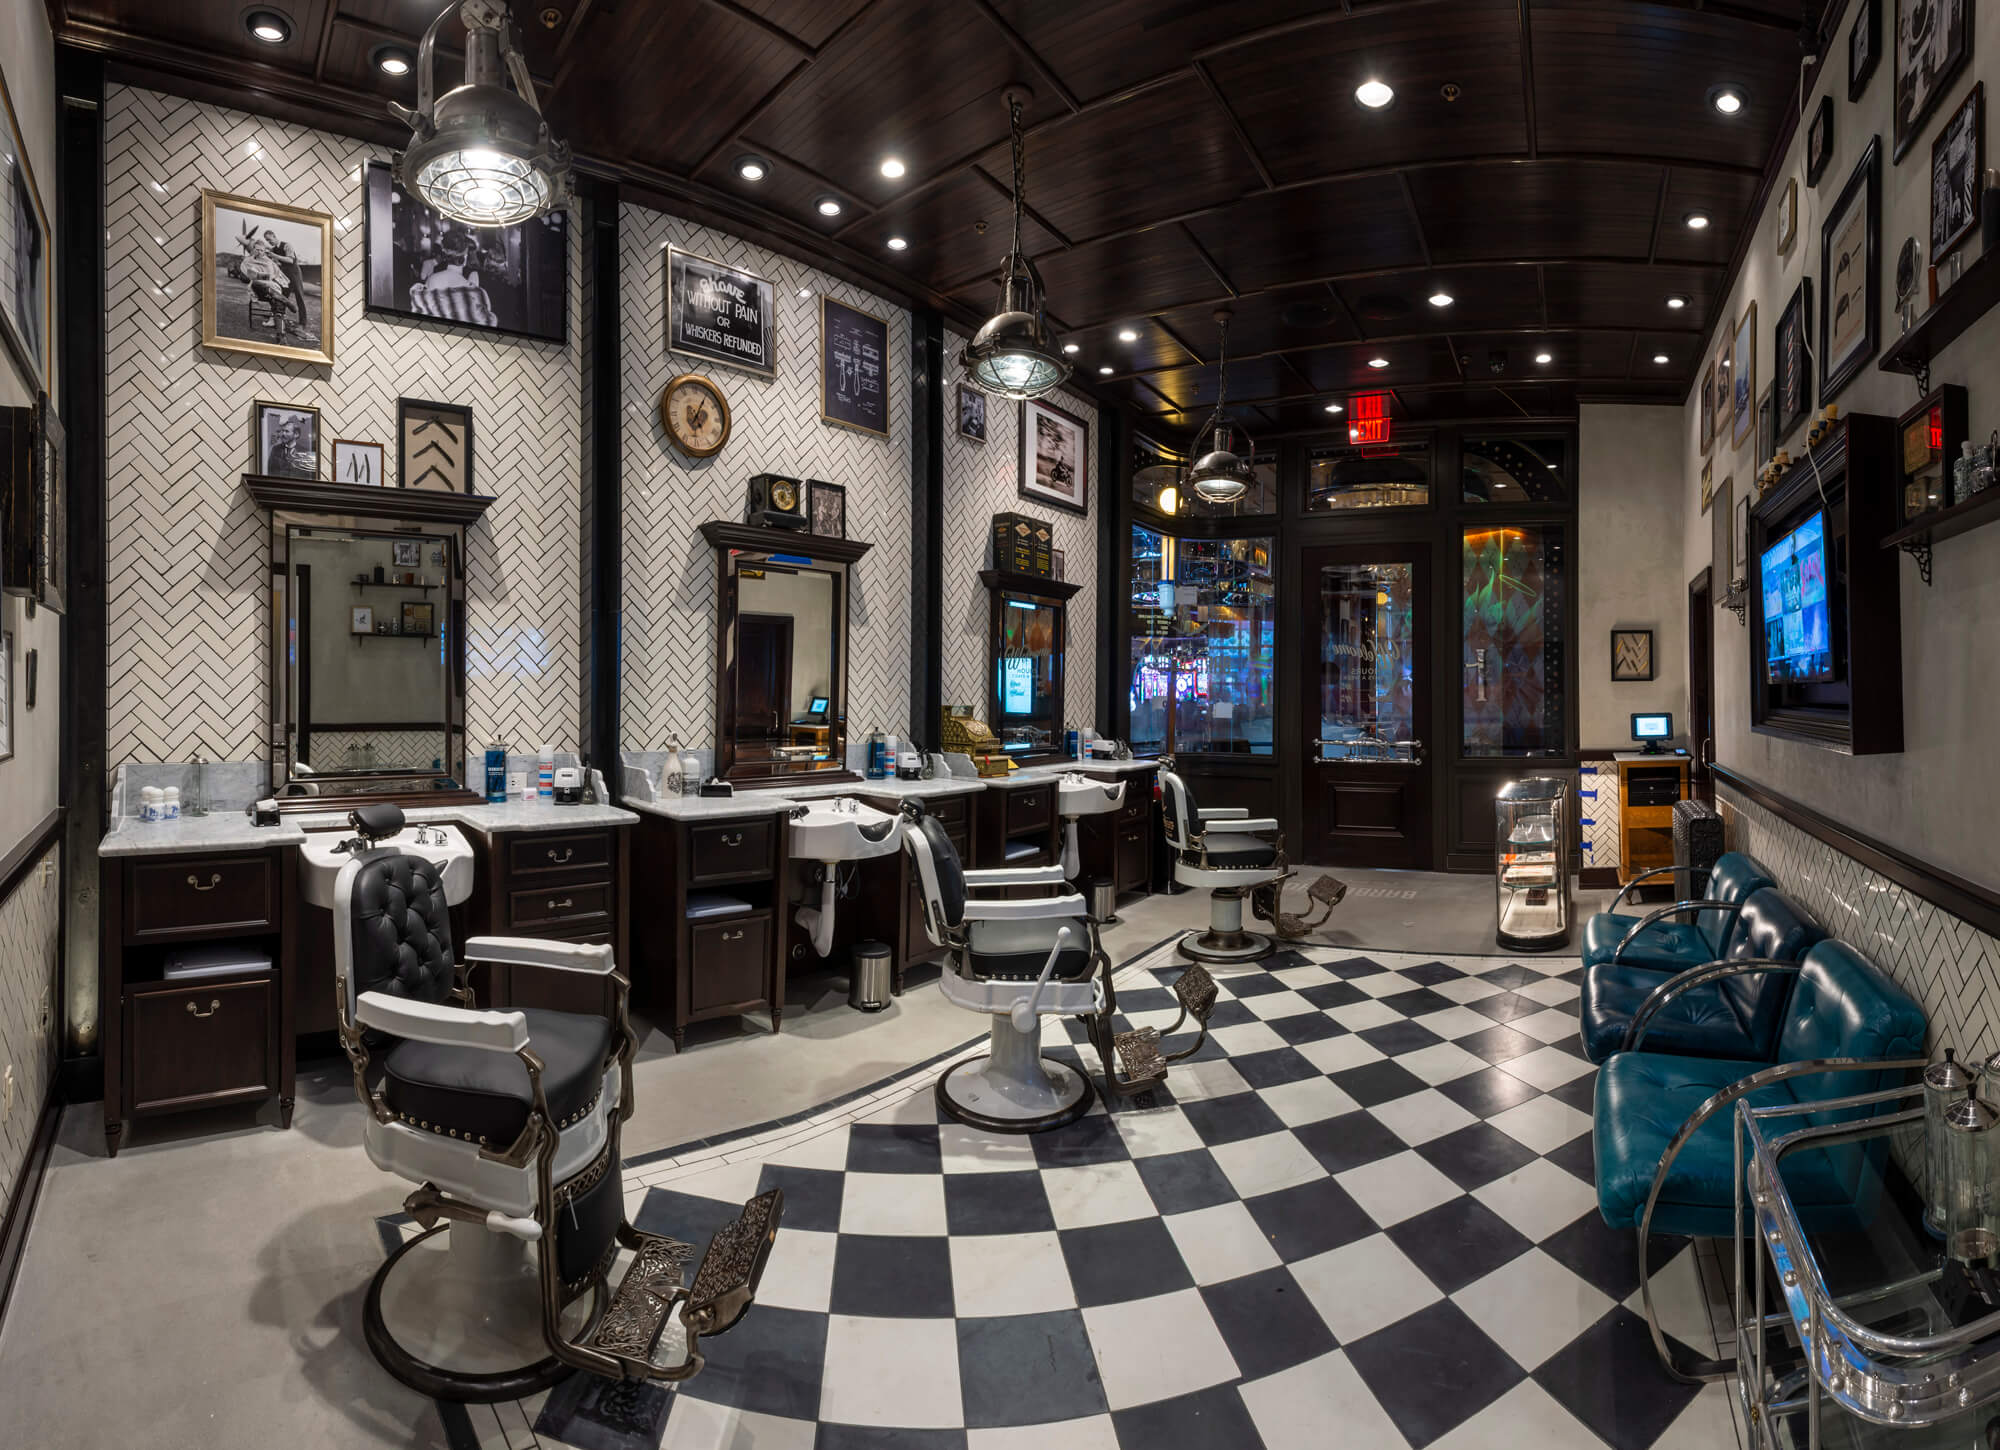 The Barbershop store front inside The Cosmopolitan hotel